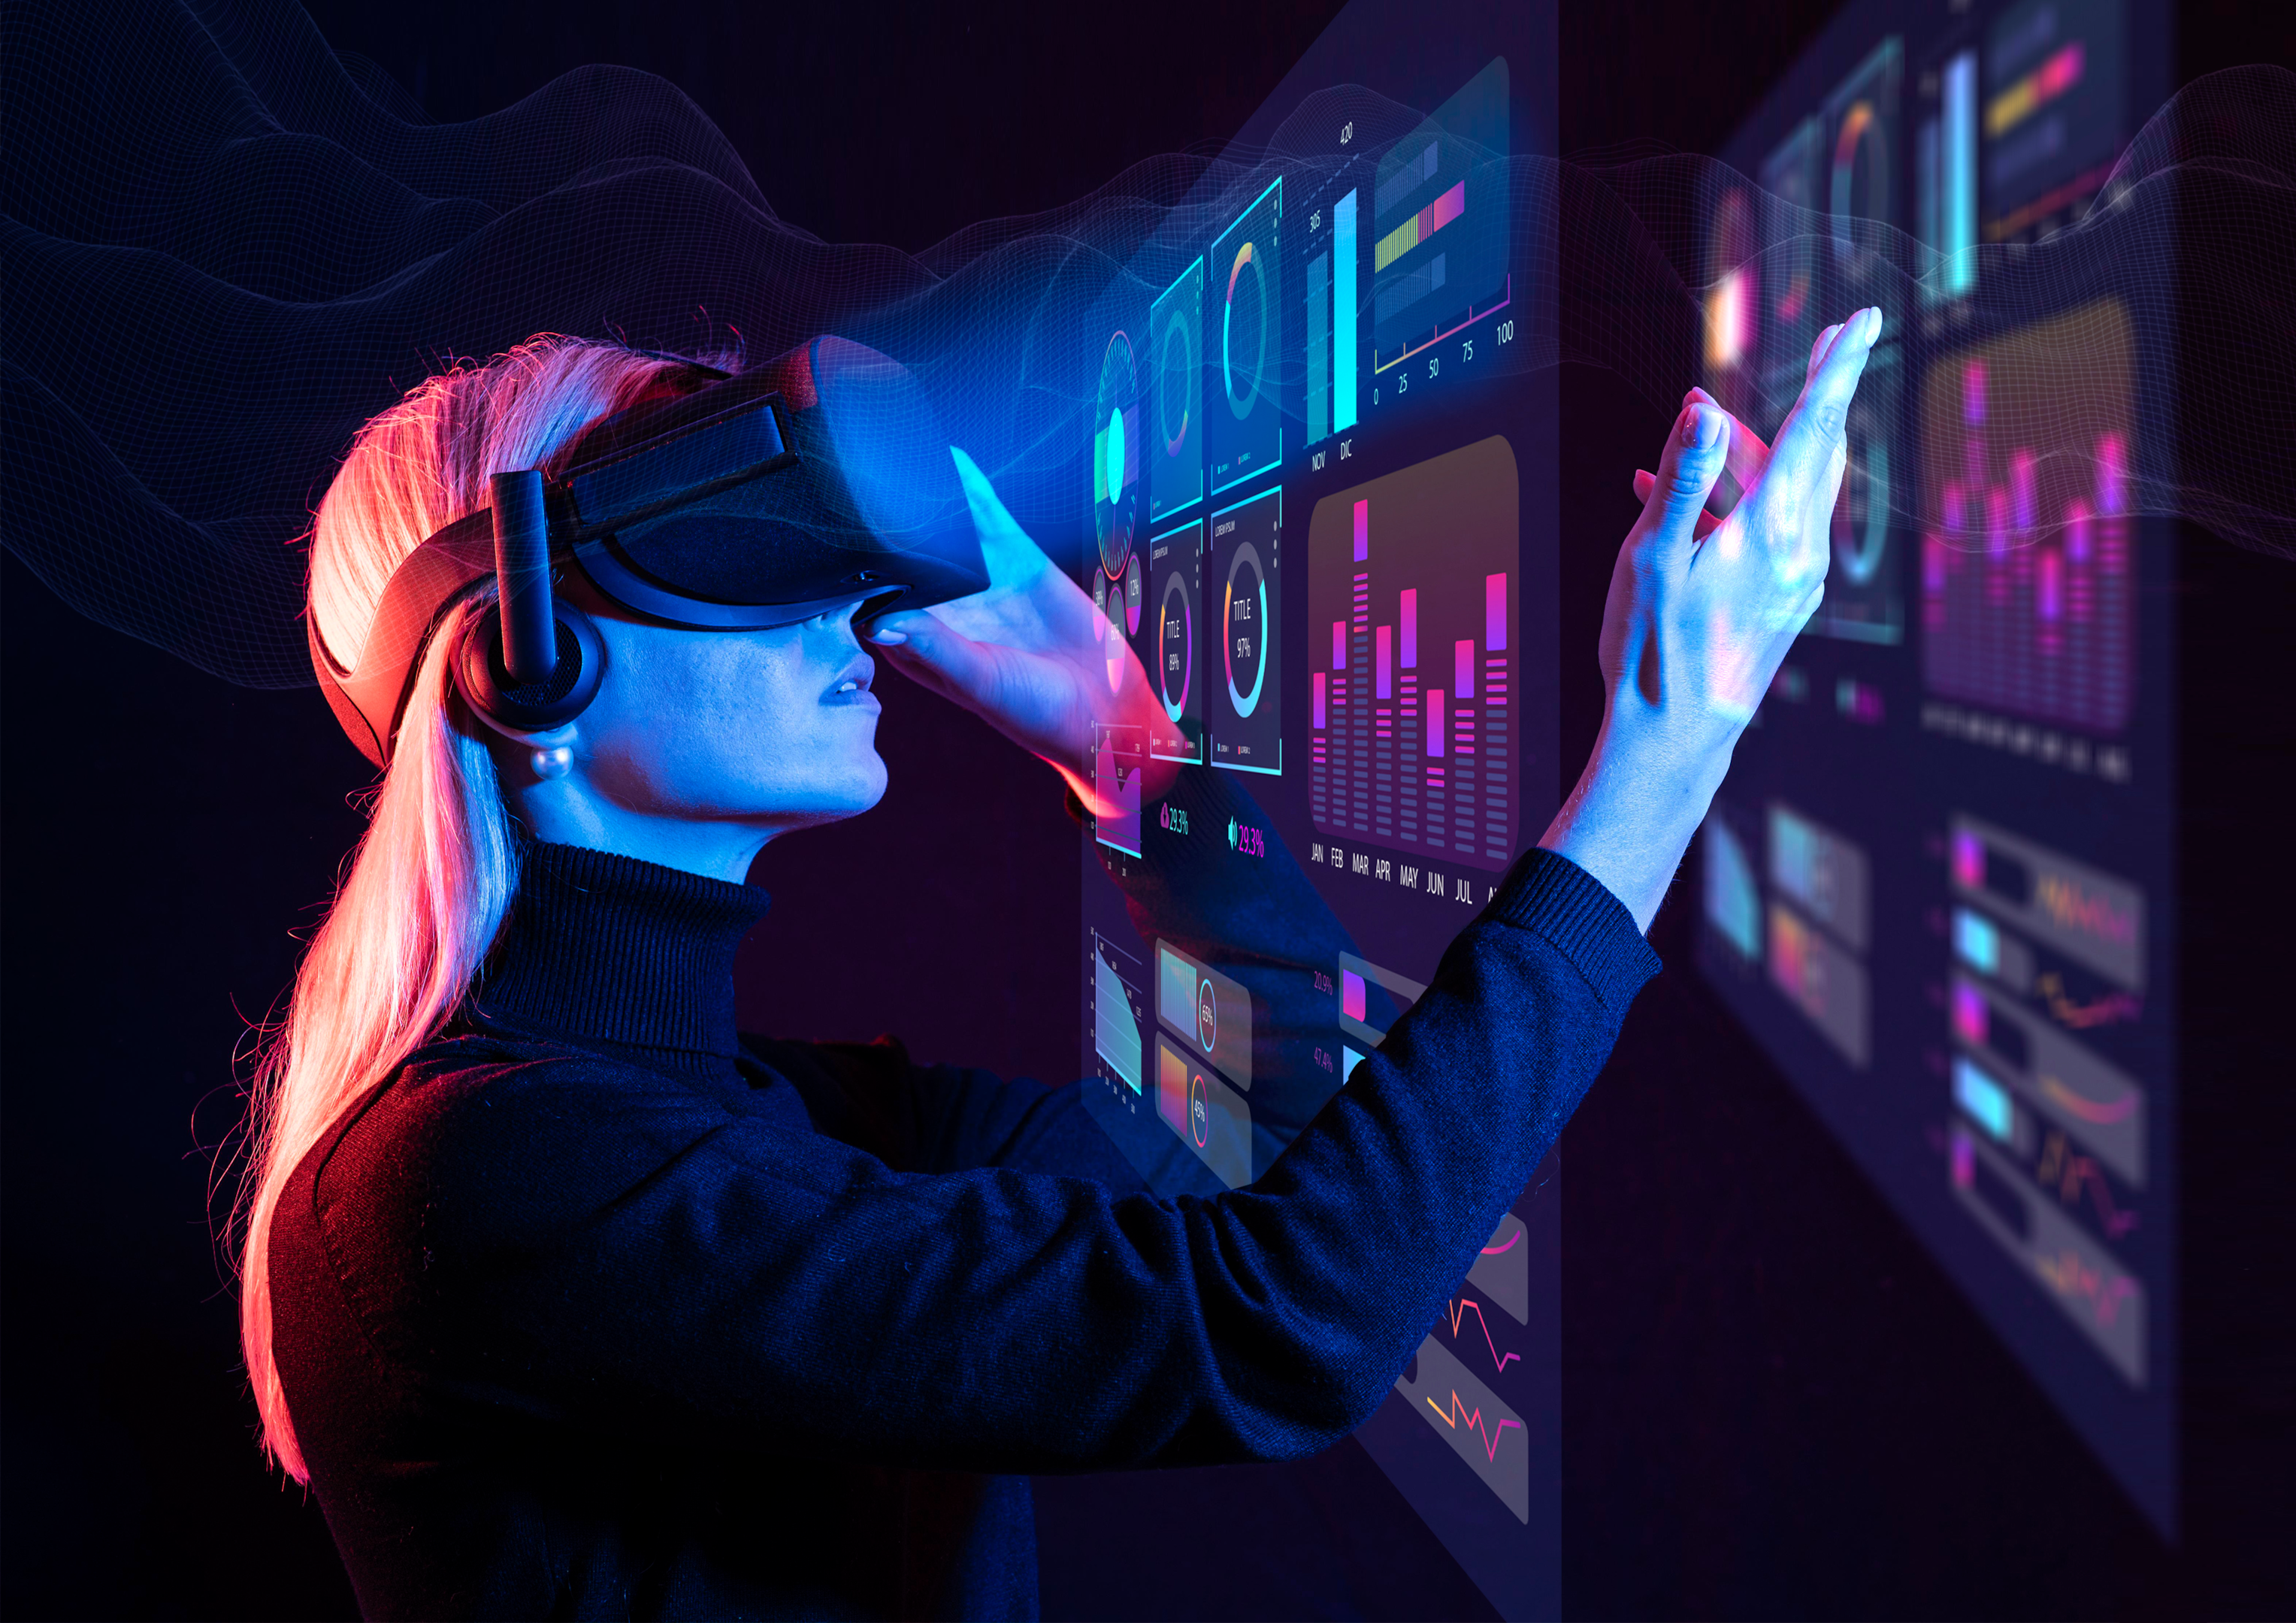 This image showcases someone entering the metaverse through VR technology